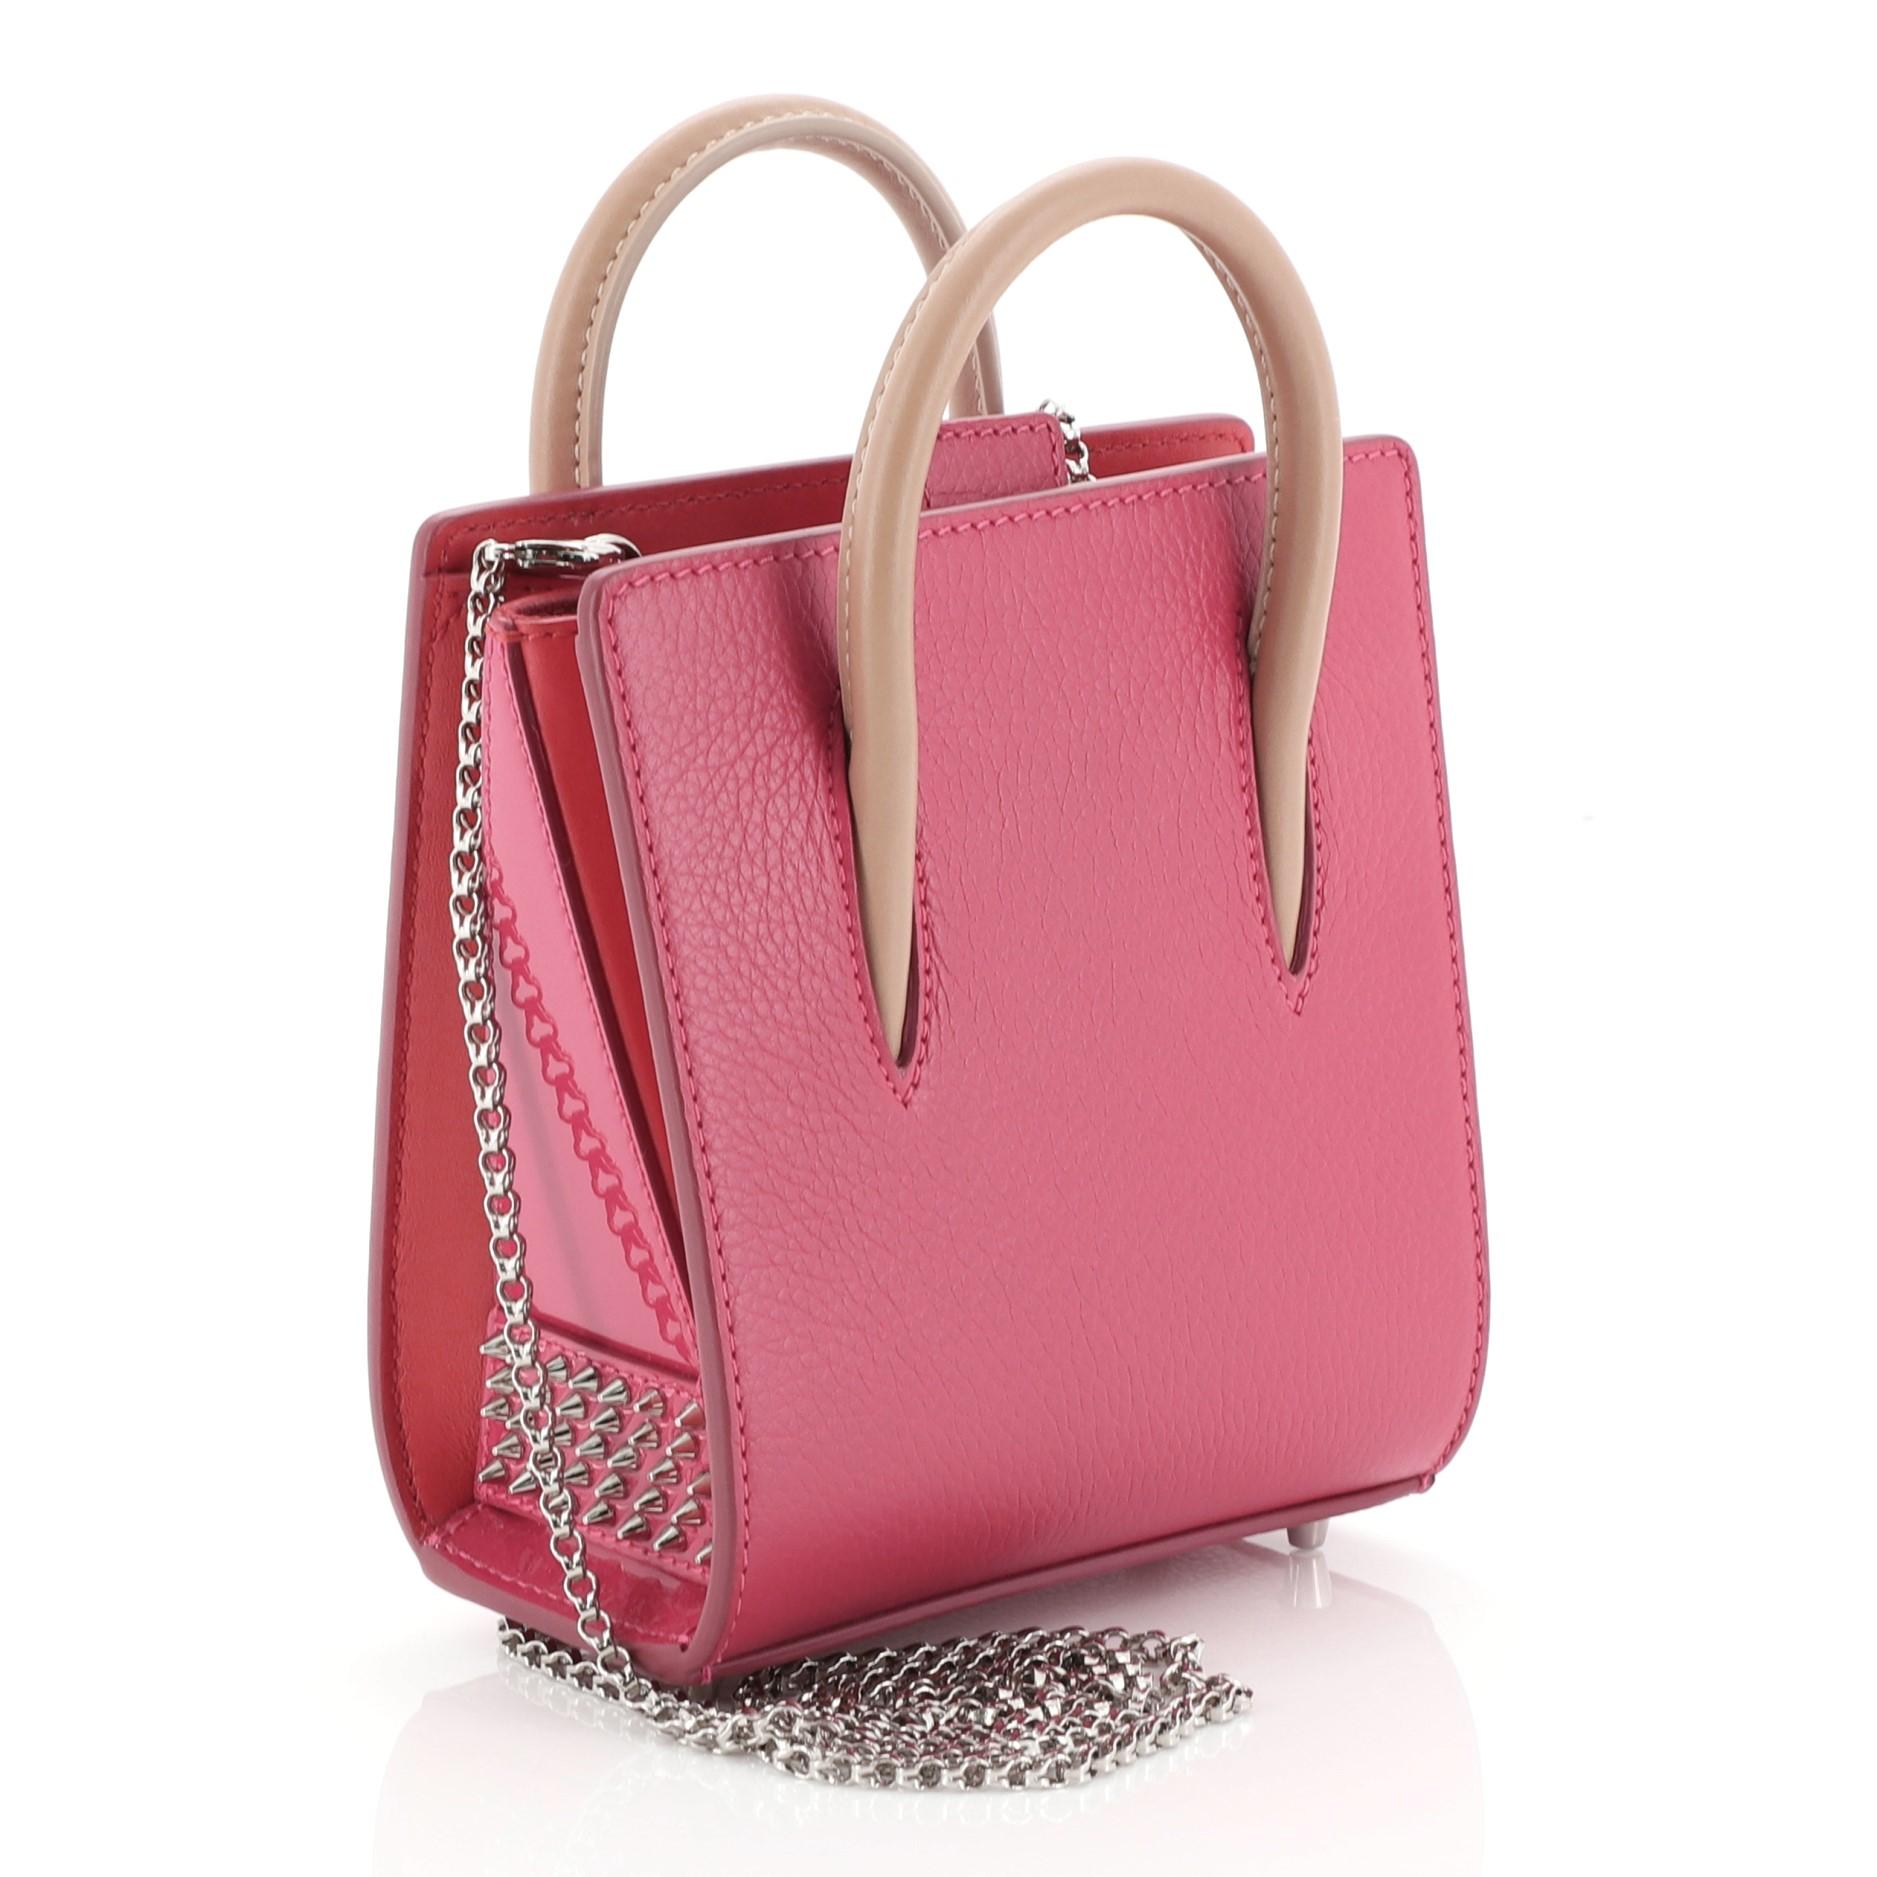 This Christian Louboutin Paloma Tote Leather Nano, crafted in red and pink leather, features spiked leopard print on the sides, dual-rolled leather handles, and silver-tone hardware. It opens to a red microfiber interior with zip pocket. 

Estimated